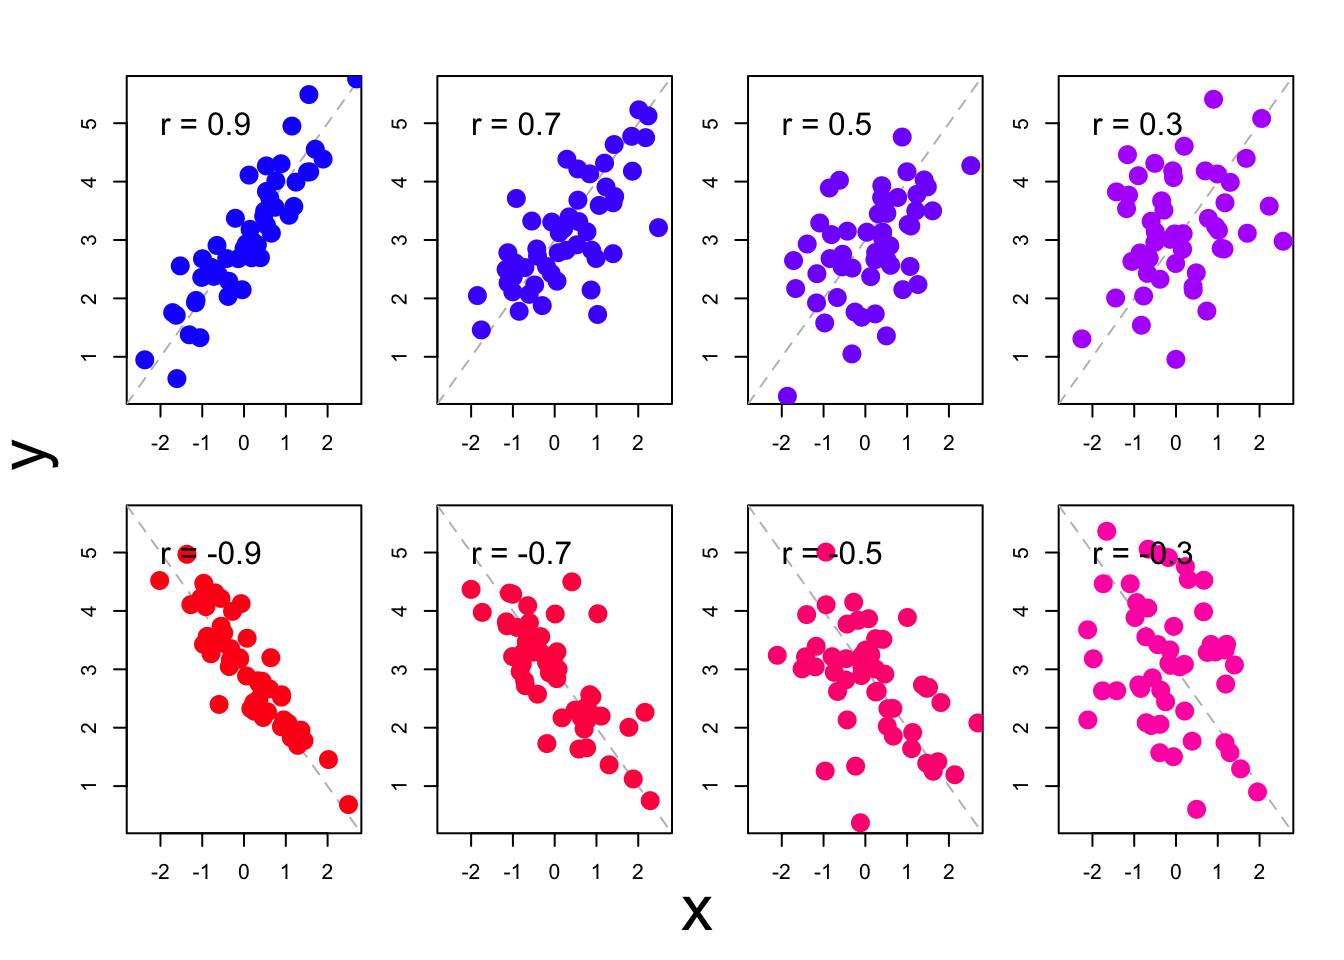 Some scatter plots of observations with accompanying correlation coefficients.